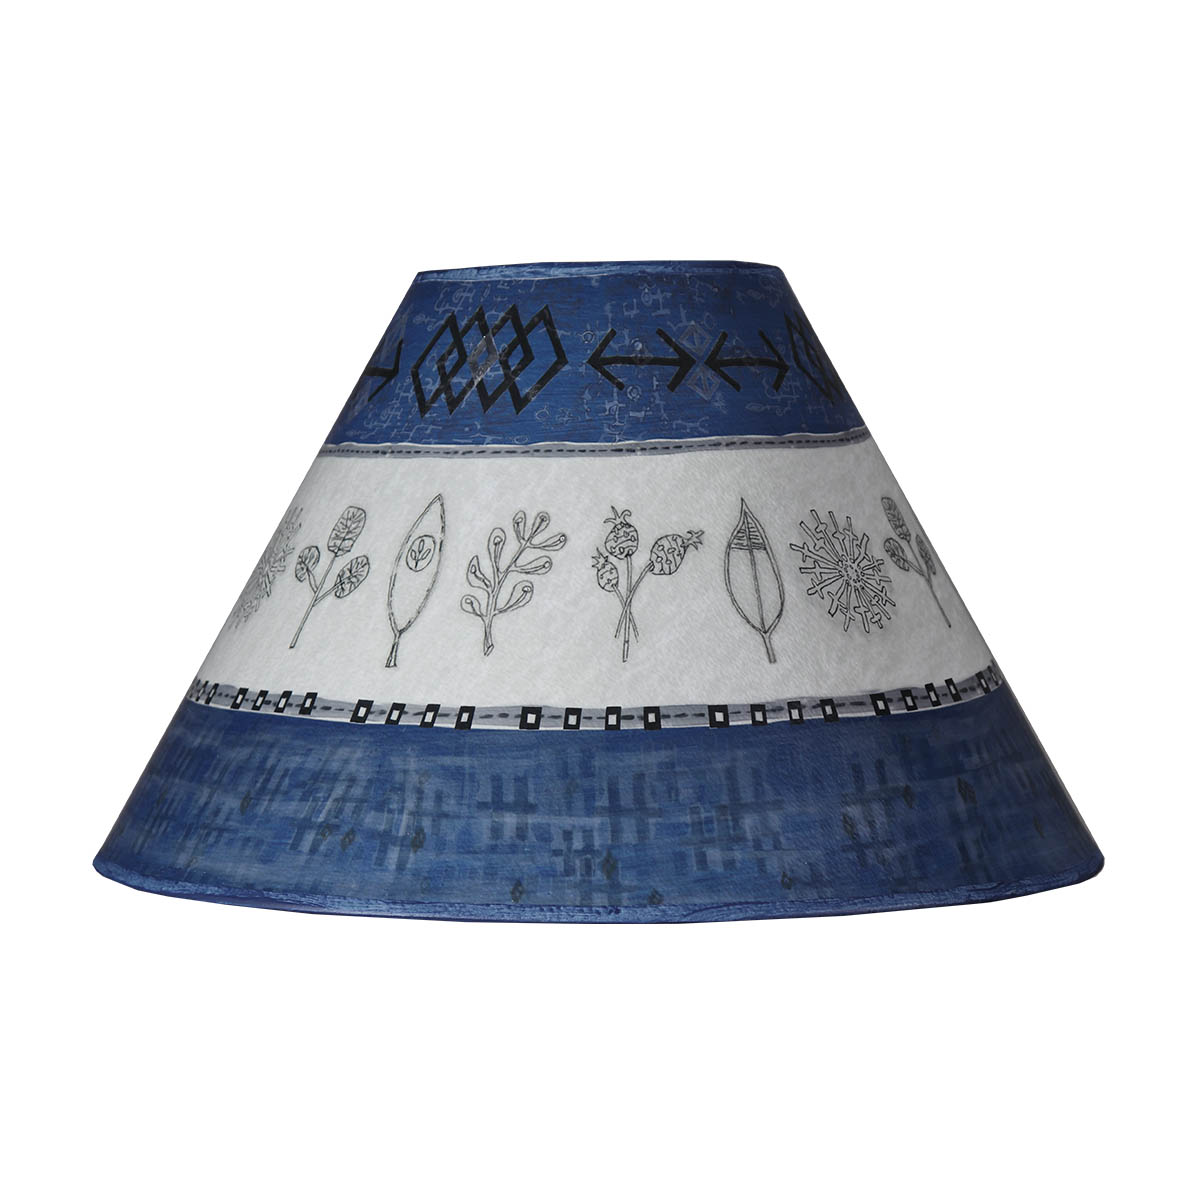 Janna Ugone & Co Lamp Shades Medium Conical Lamp Shade in Woven & Sprig in Sapphire